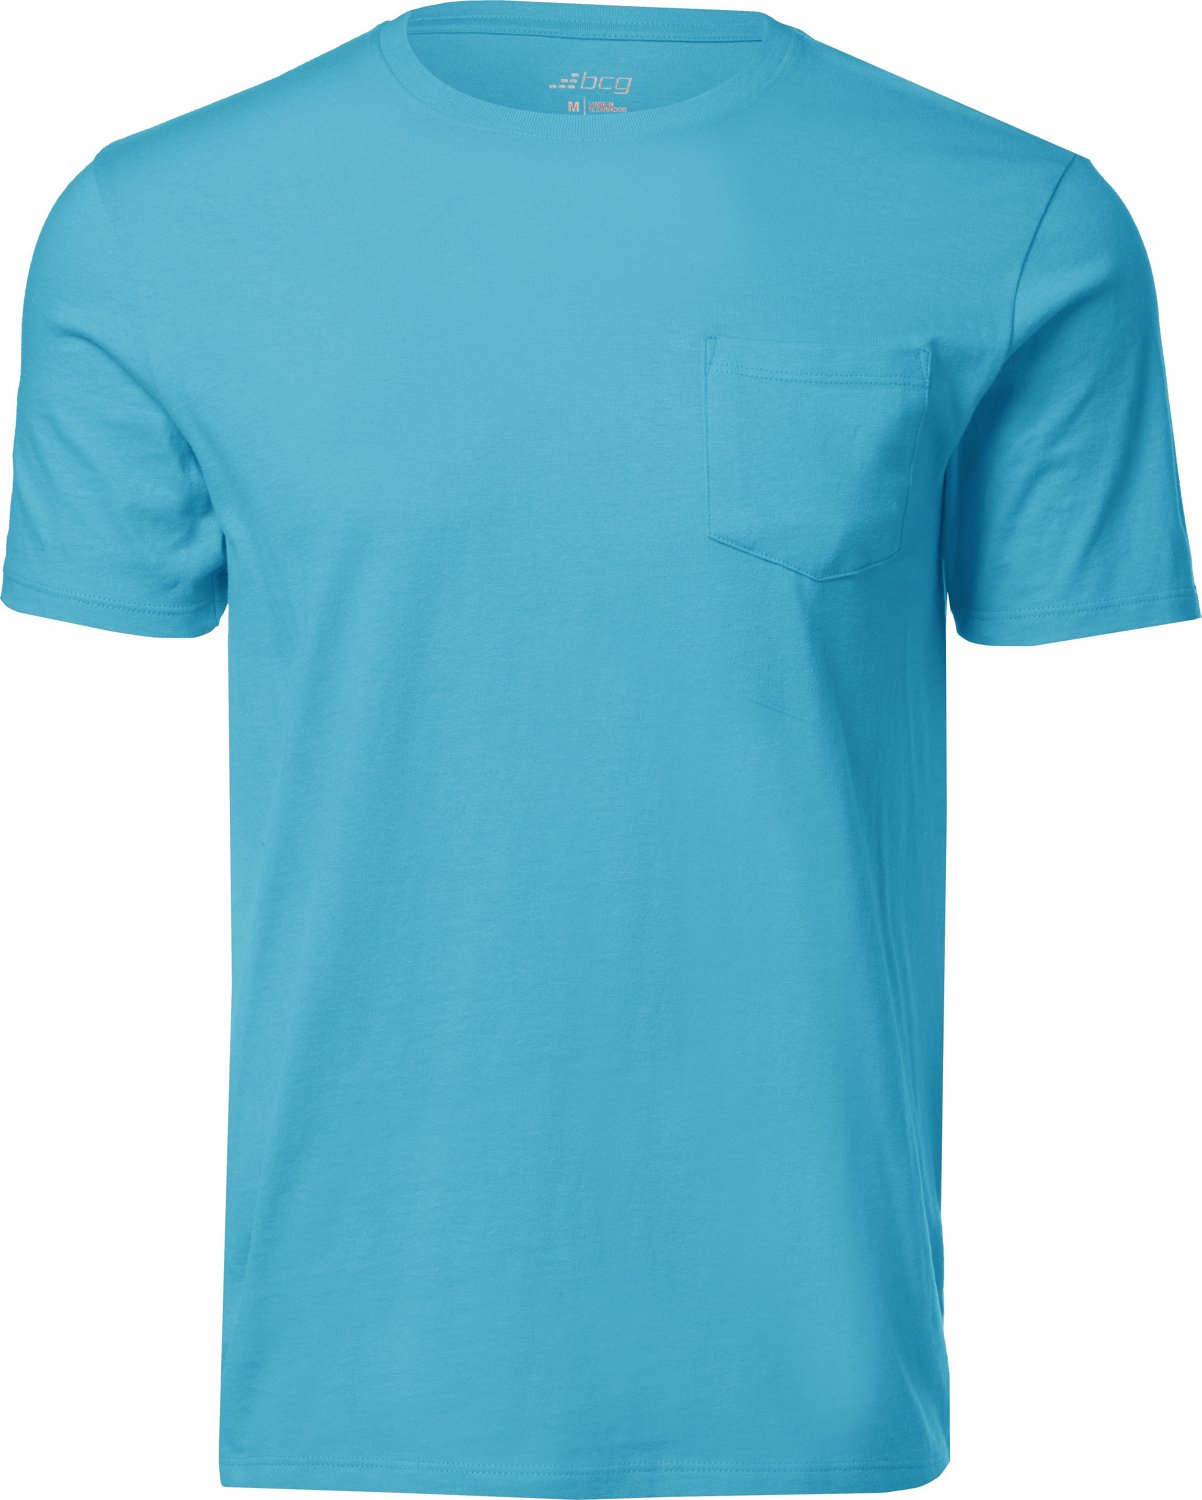 NFL Team Apparel - Authenticated T-Shirt - Polyester Turquoise Plain for Men, Good Condition